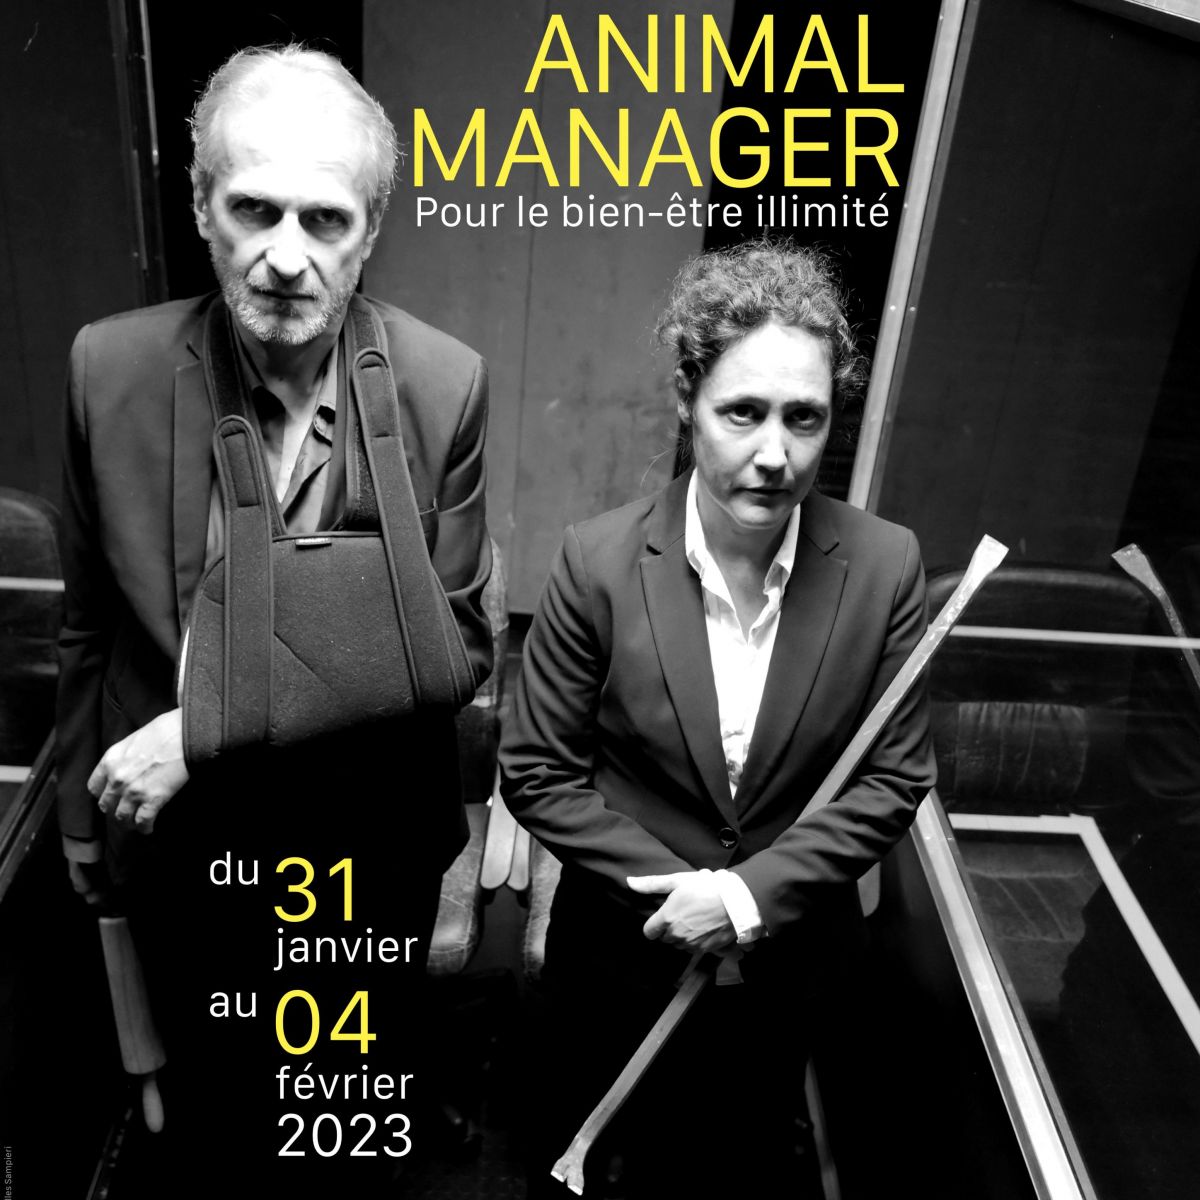 ANIMAL MANAGER